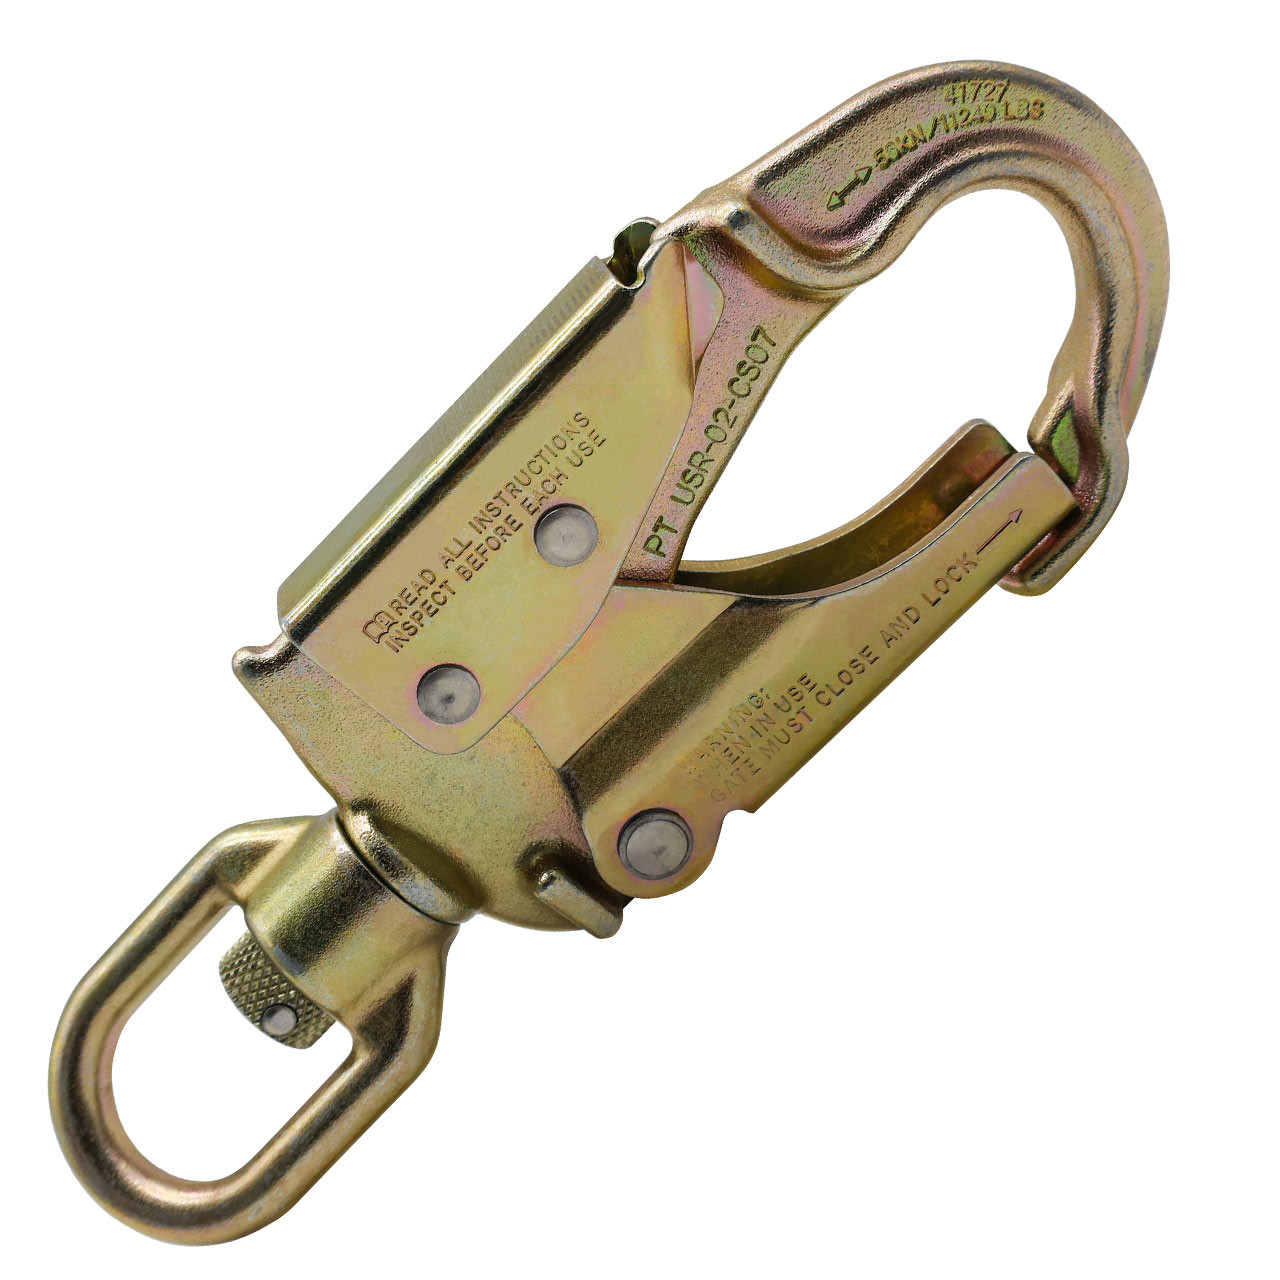 Steel Swivel Hooks, Hardware Tools Double Ended Swivel Hook for 130kg Load  Bearing for Connection Between Steel Wire Ropes And Chains